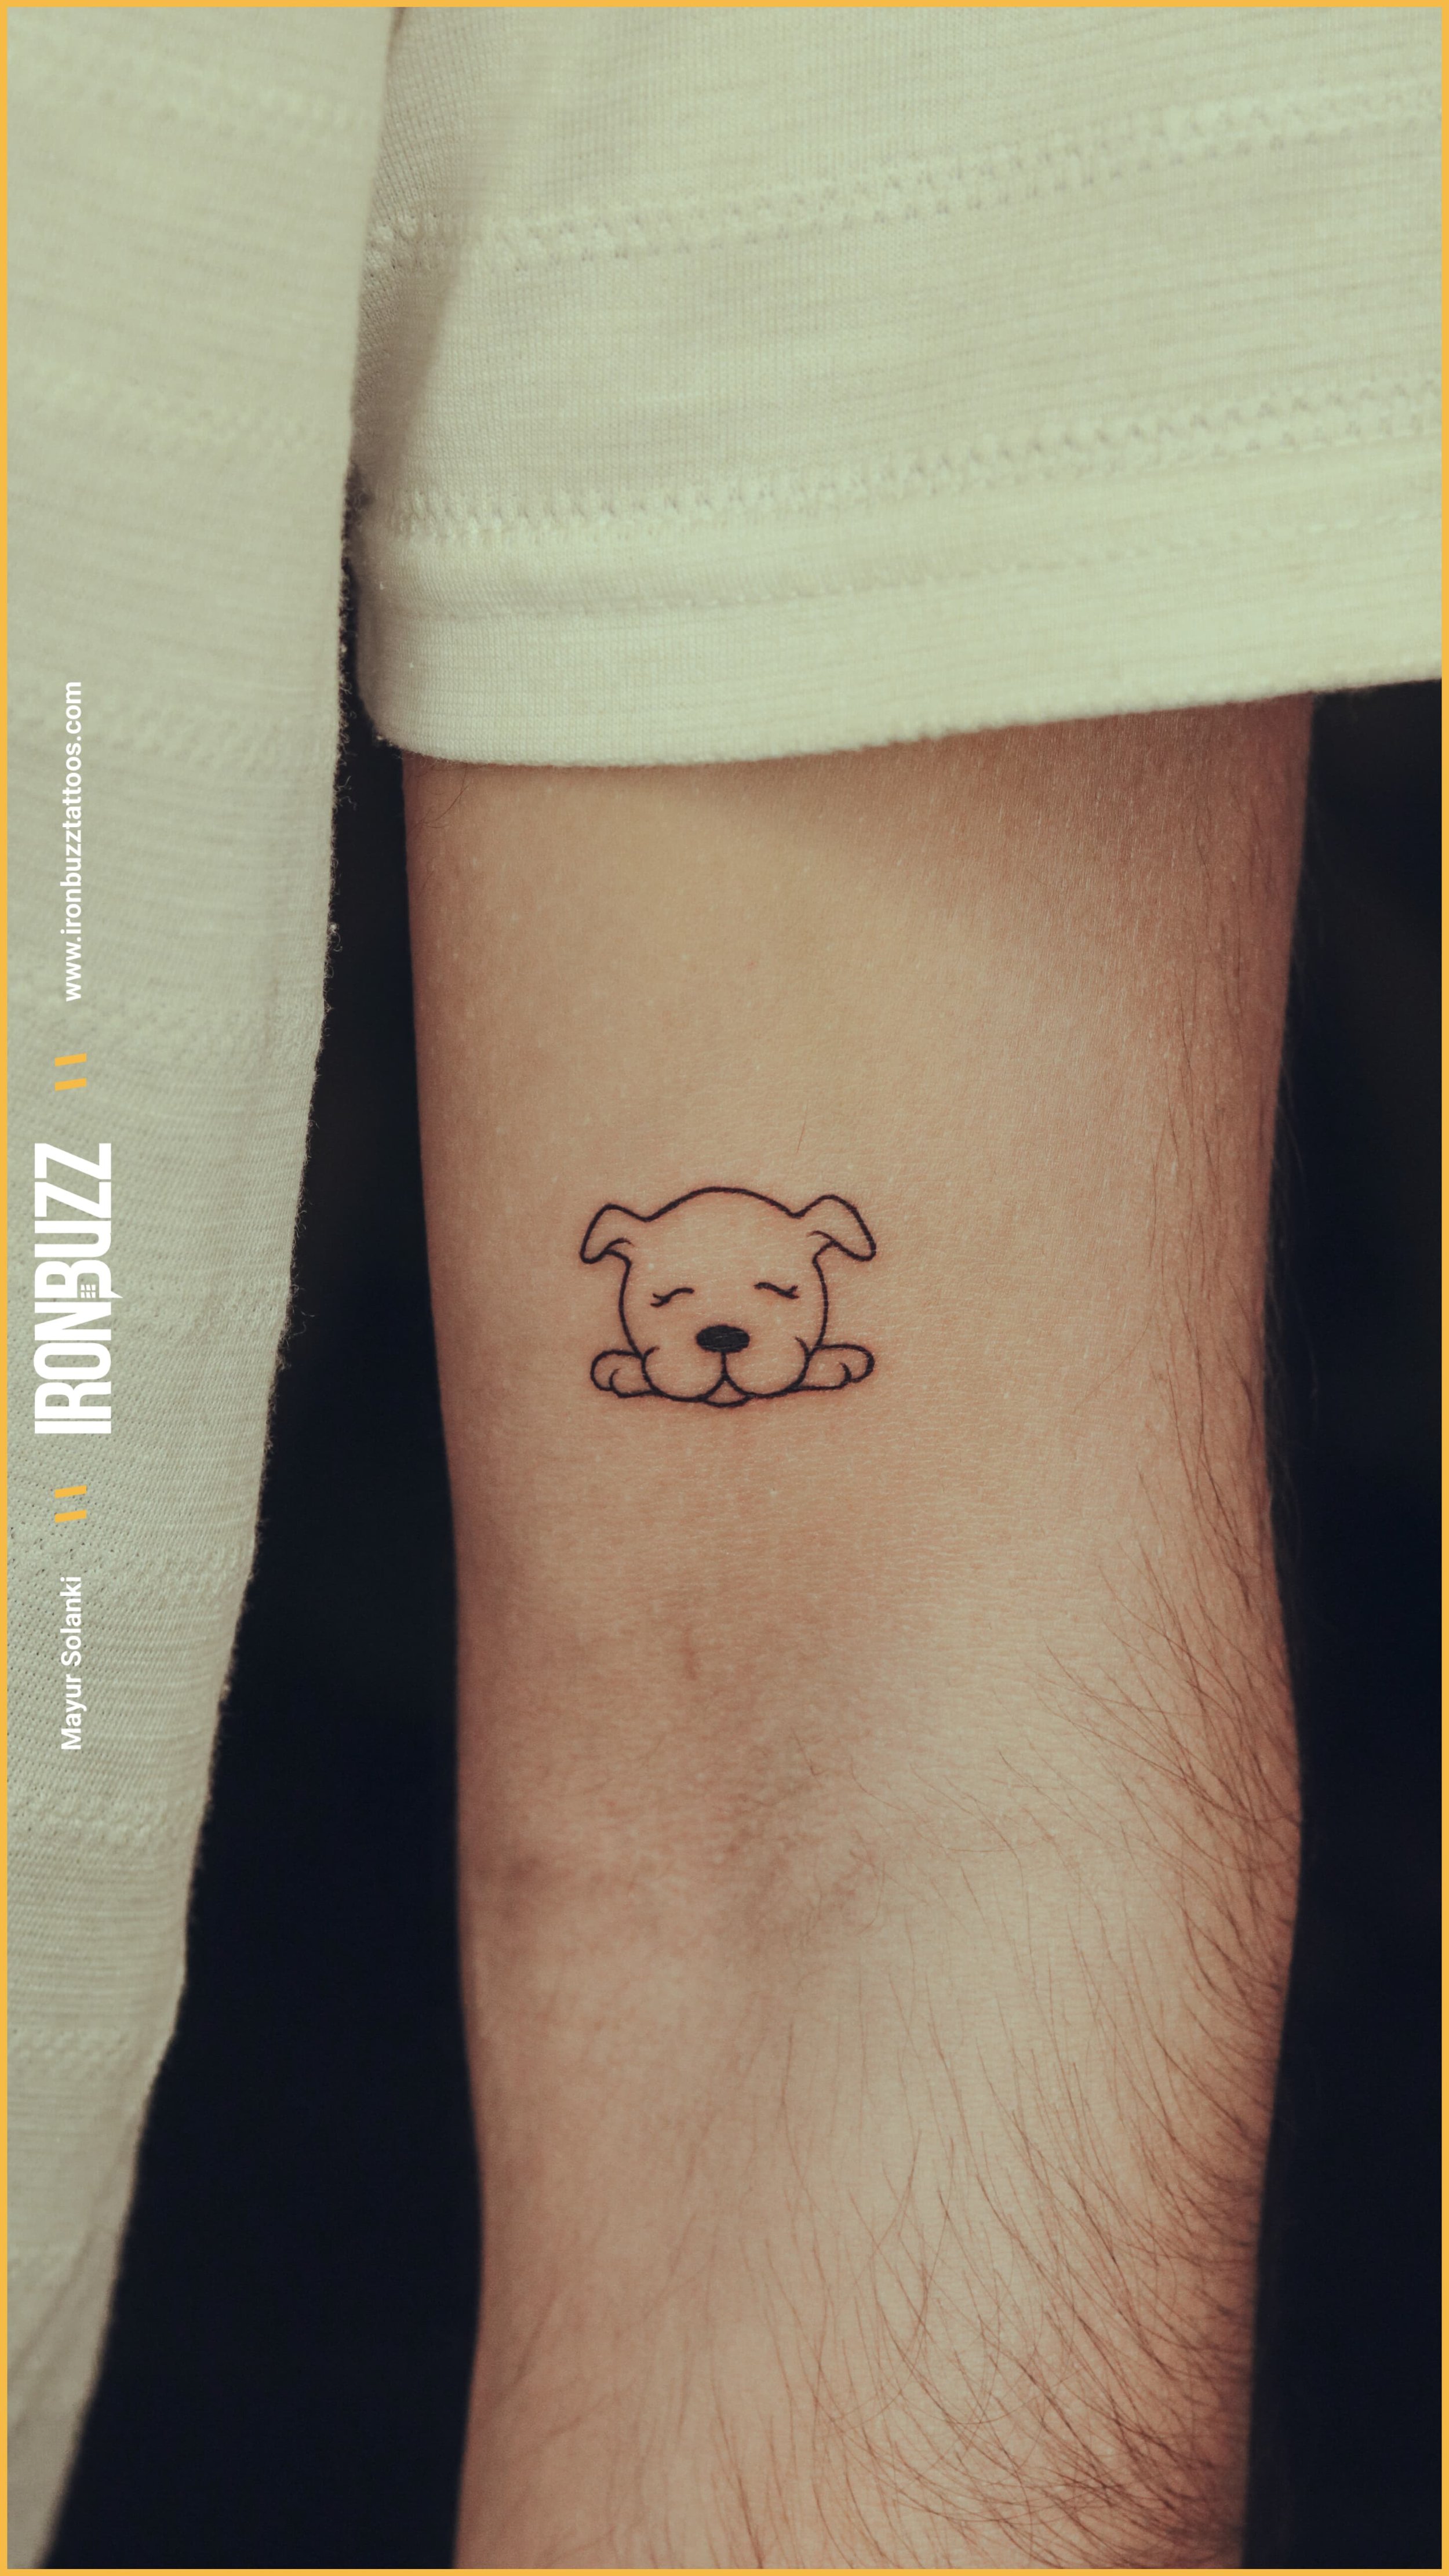 Naughty Bear Semi-Permanent Tattoo. Lasts 1-2 weeks. Painless and easy to  apply. Organic ink. Browse more or create your own. | Inkbox™ |  Semi-Permanent Tattoos